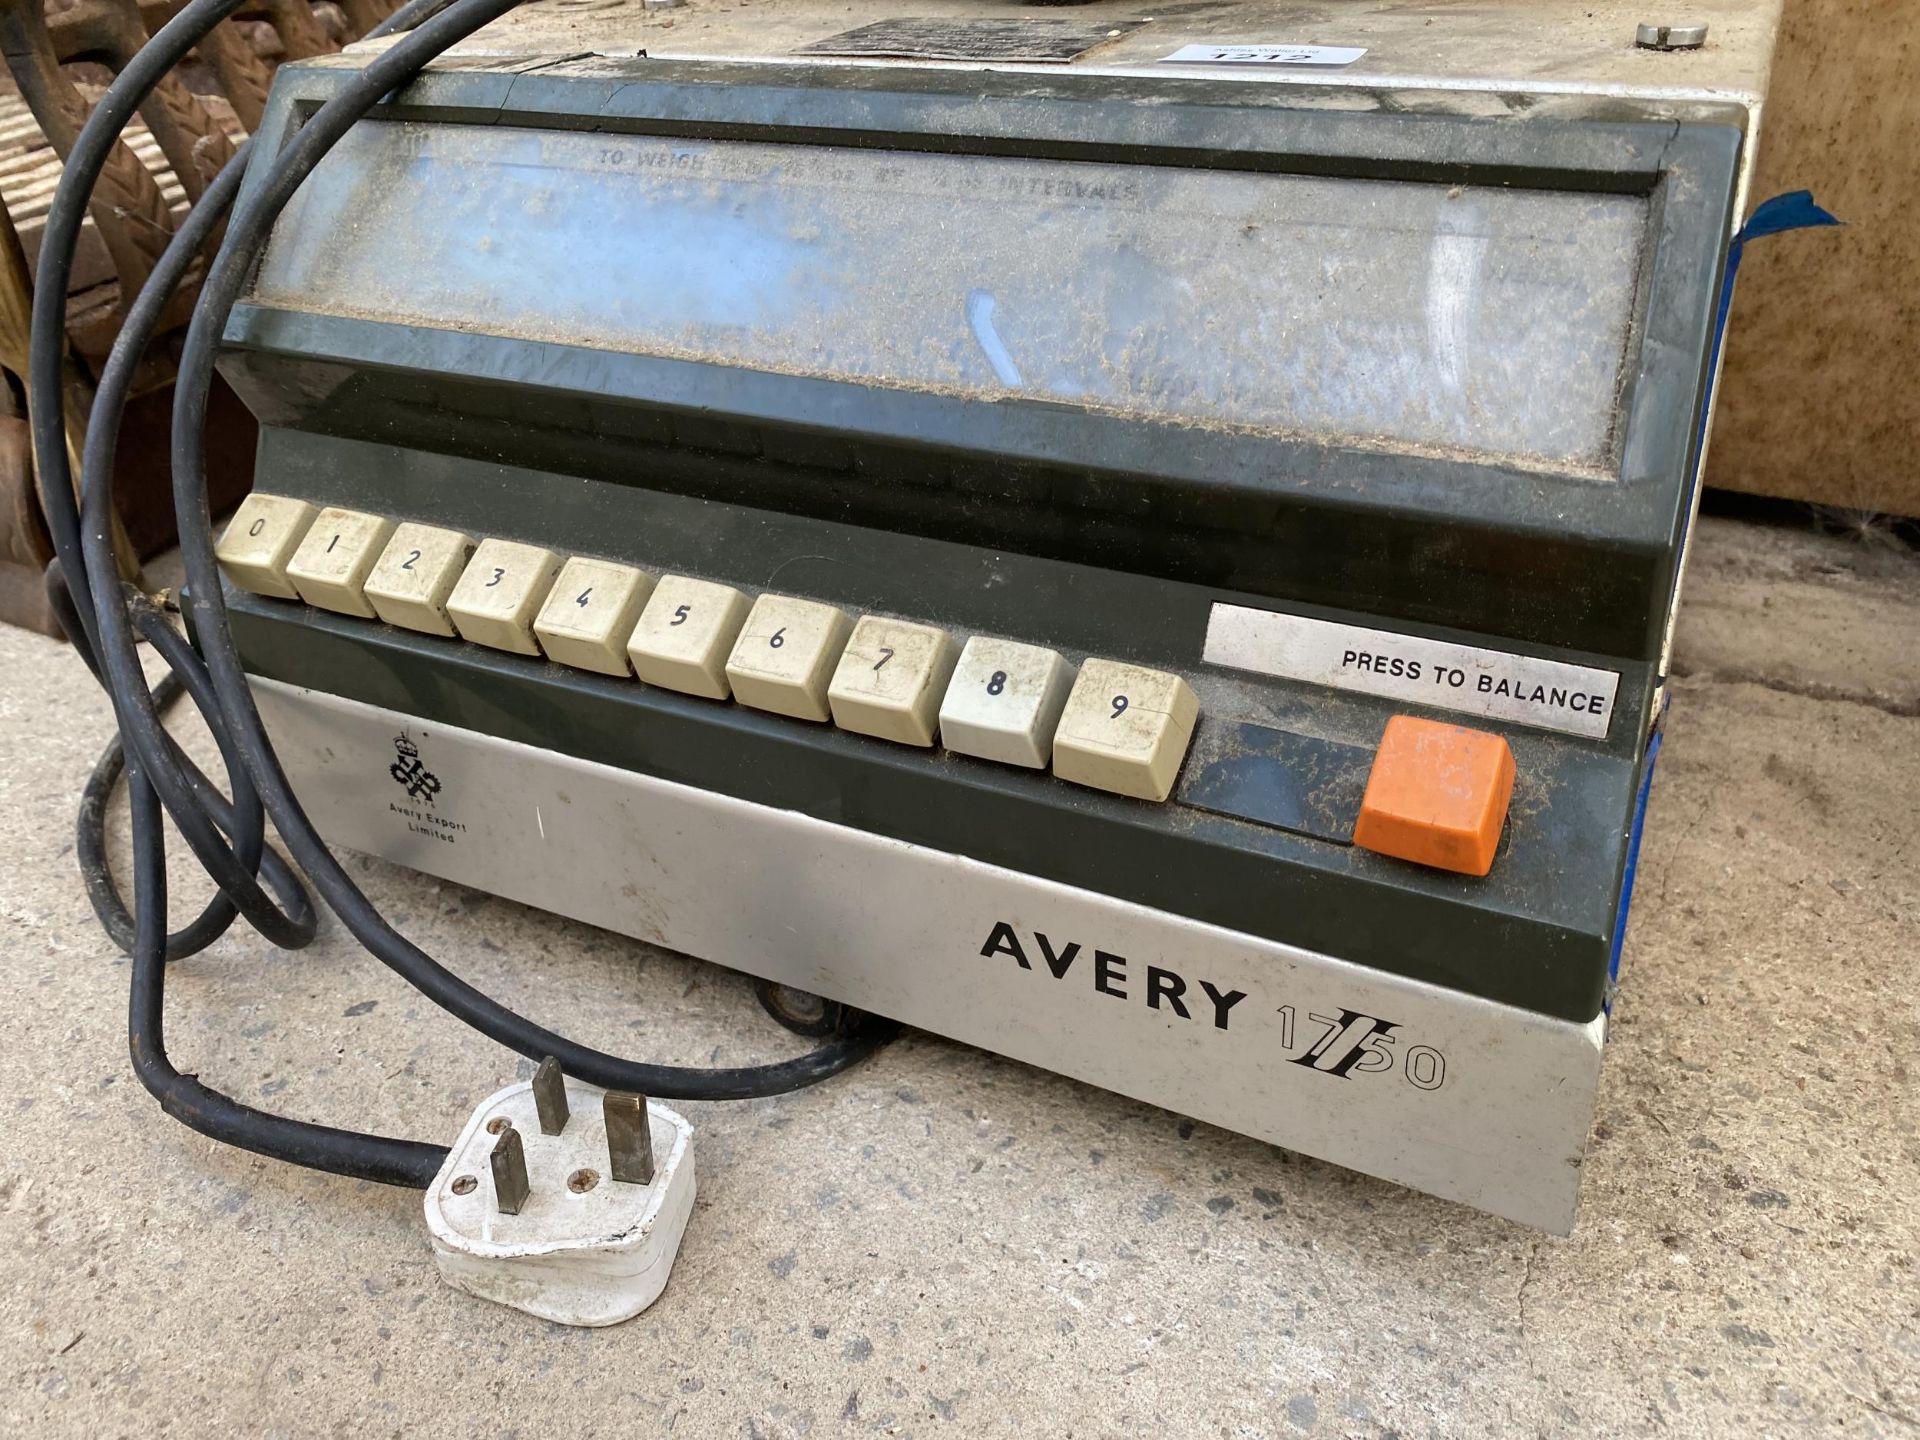 A SET OF RETRO/VINTAGE AVERY 1750 DIGITAL SHOP SCALES - Image 2 of 6